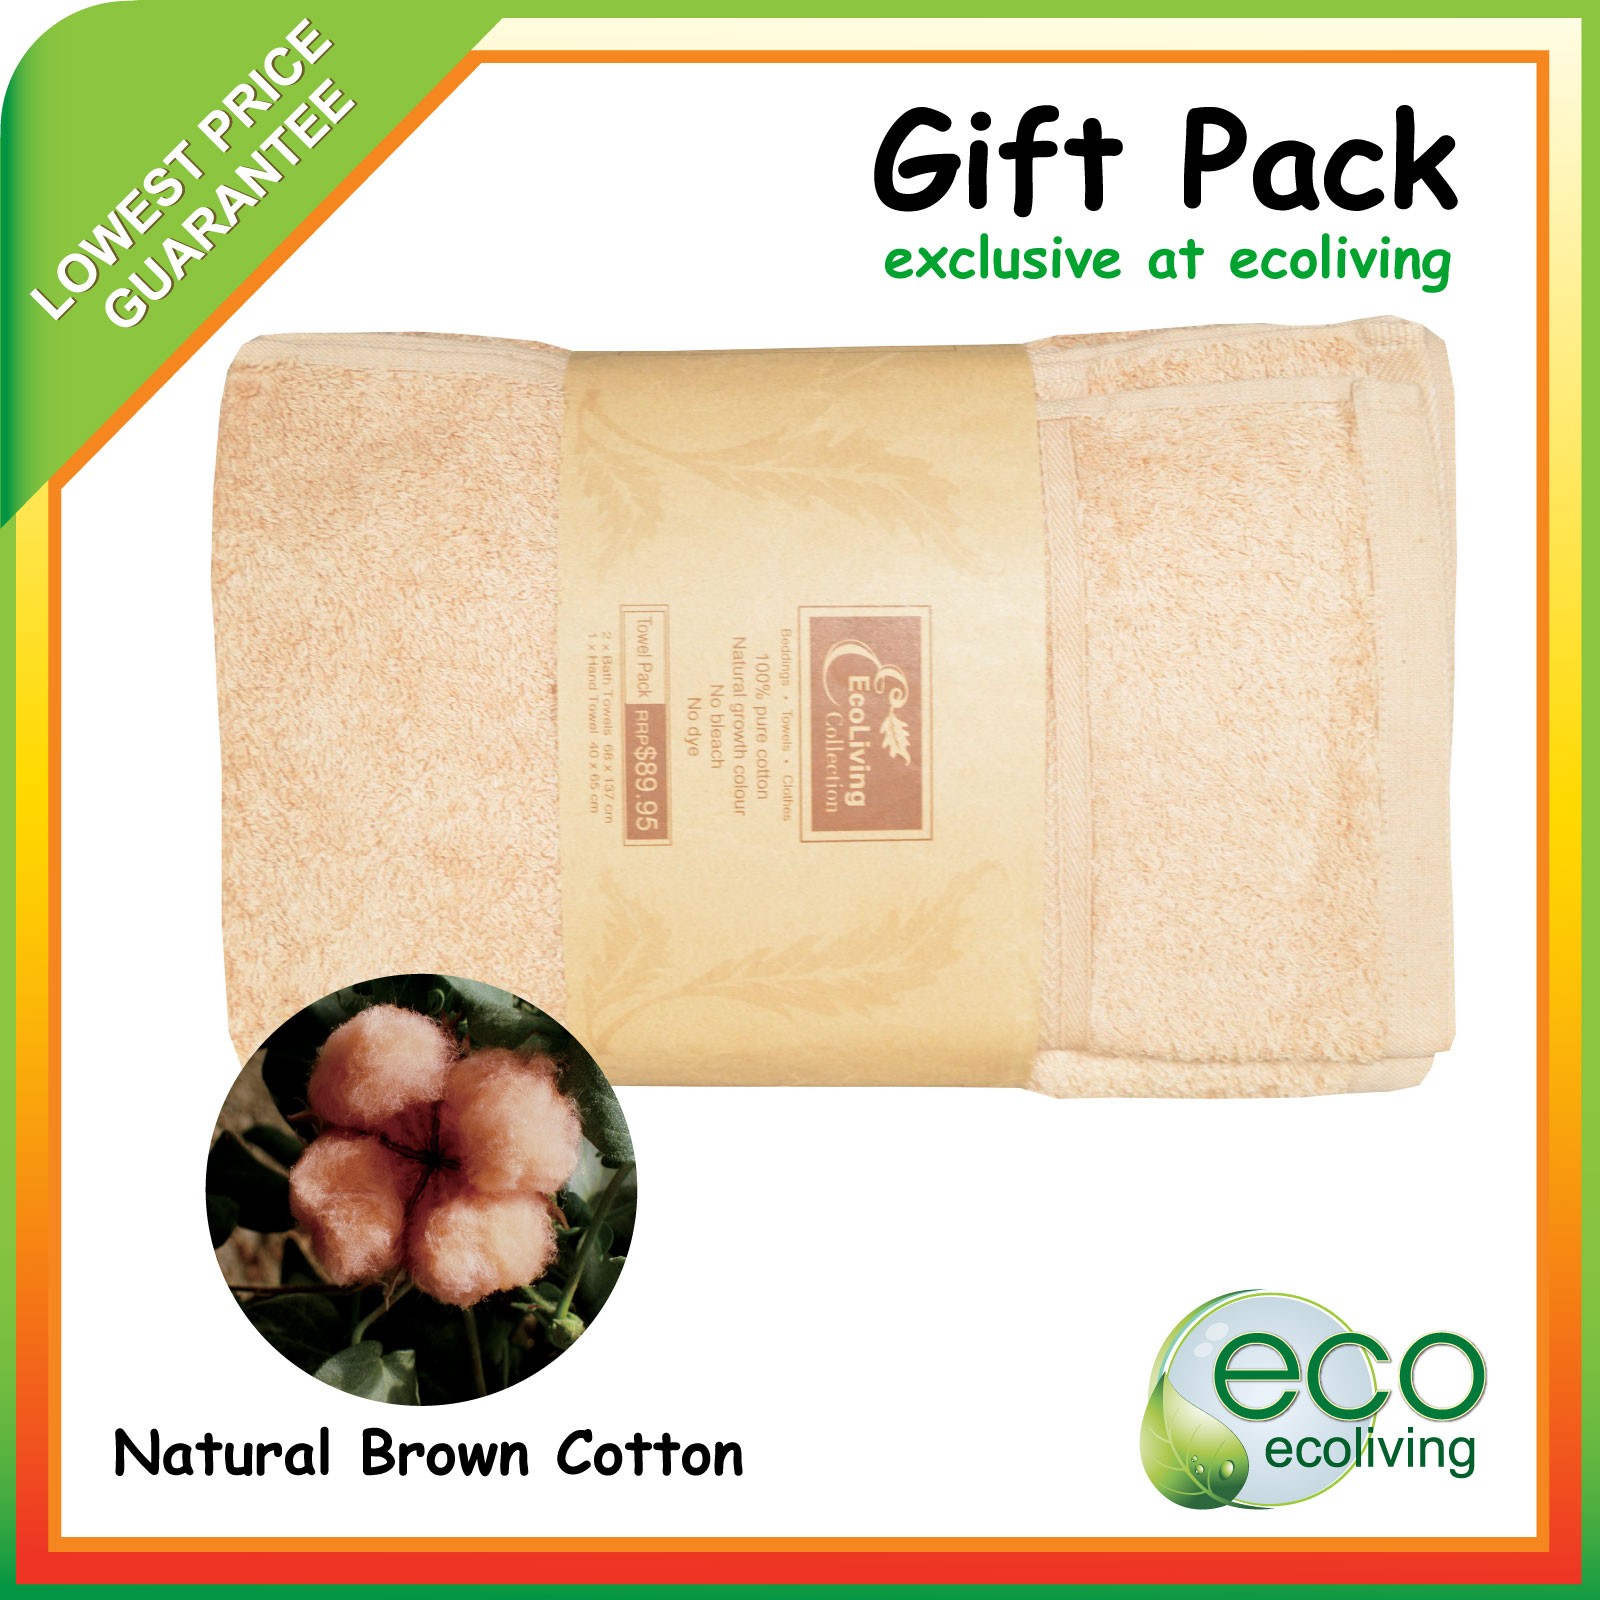 Soft Touch Classic Towel Gift Pack